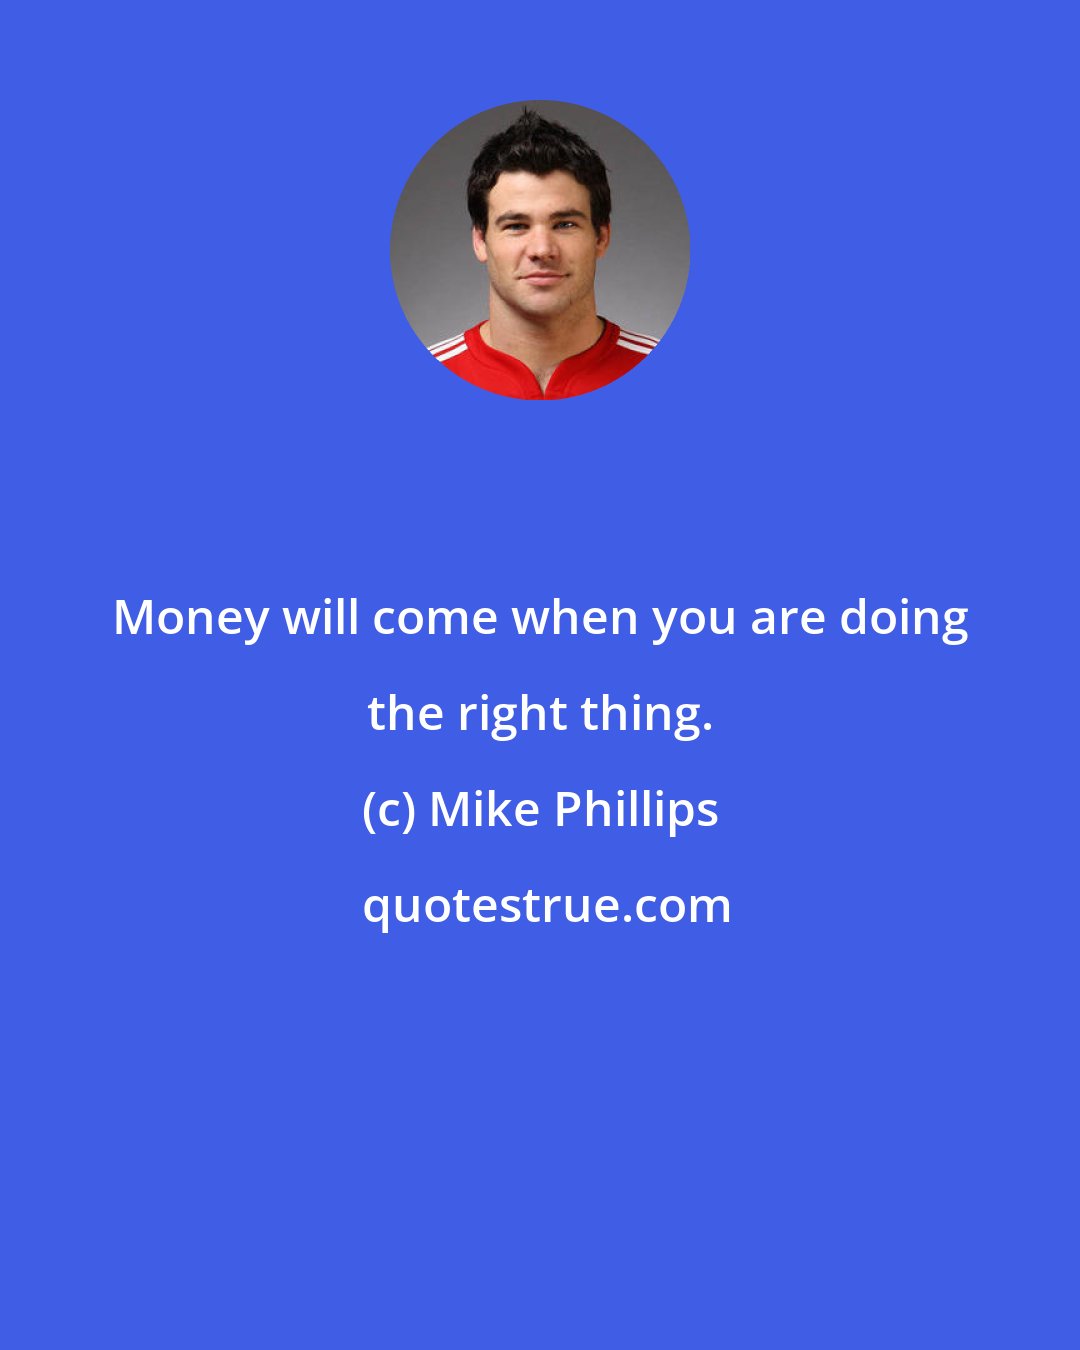 Mike Phillips: Money will come when you are doing the right thing.